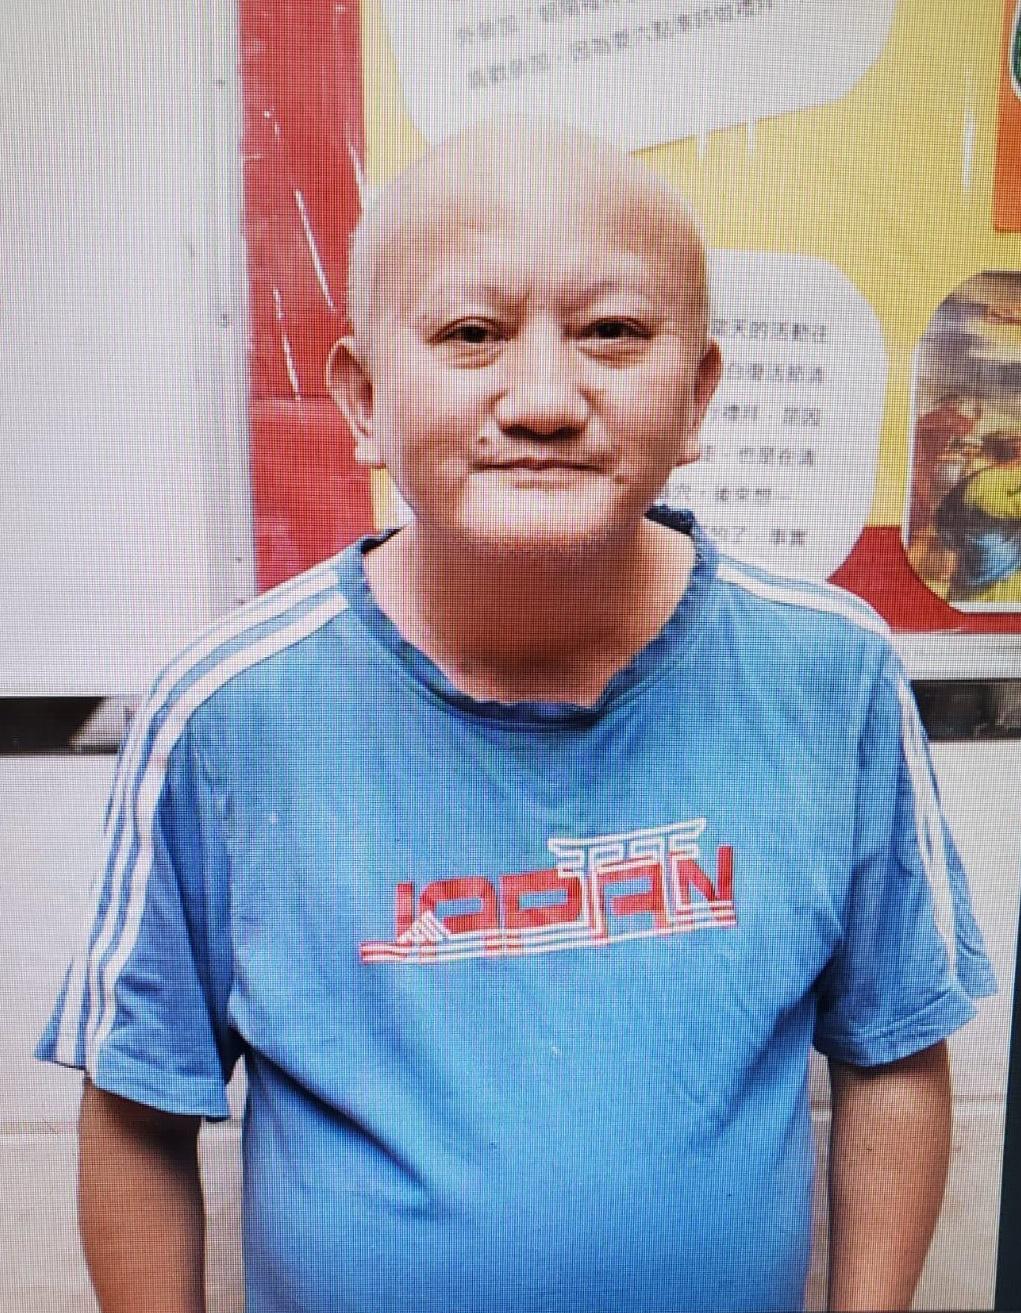 Lo Po-tak, aged 59, is about 1.65 metres tall, 65 kilograms in weight and of fat build. He has a round face with yellow complexion and short black hair. He was last seen wearing a grey short-sleeved shirt, black shorts and black slippers.